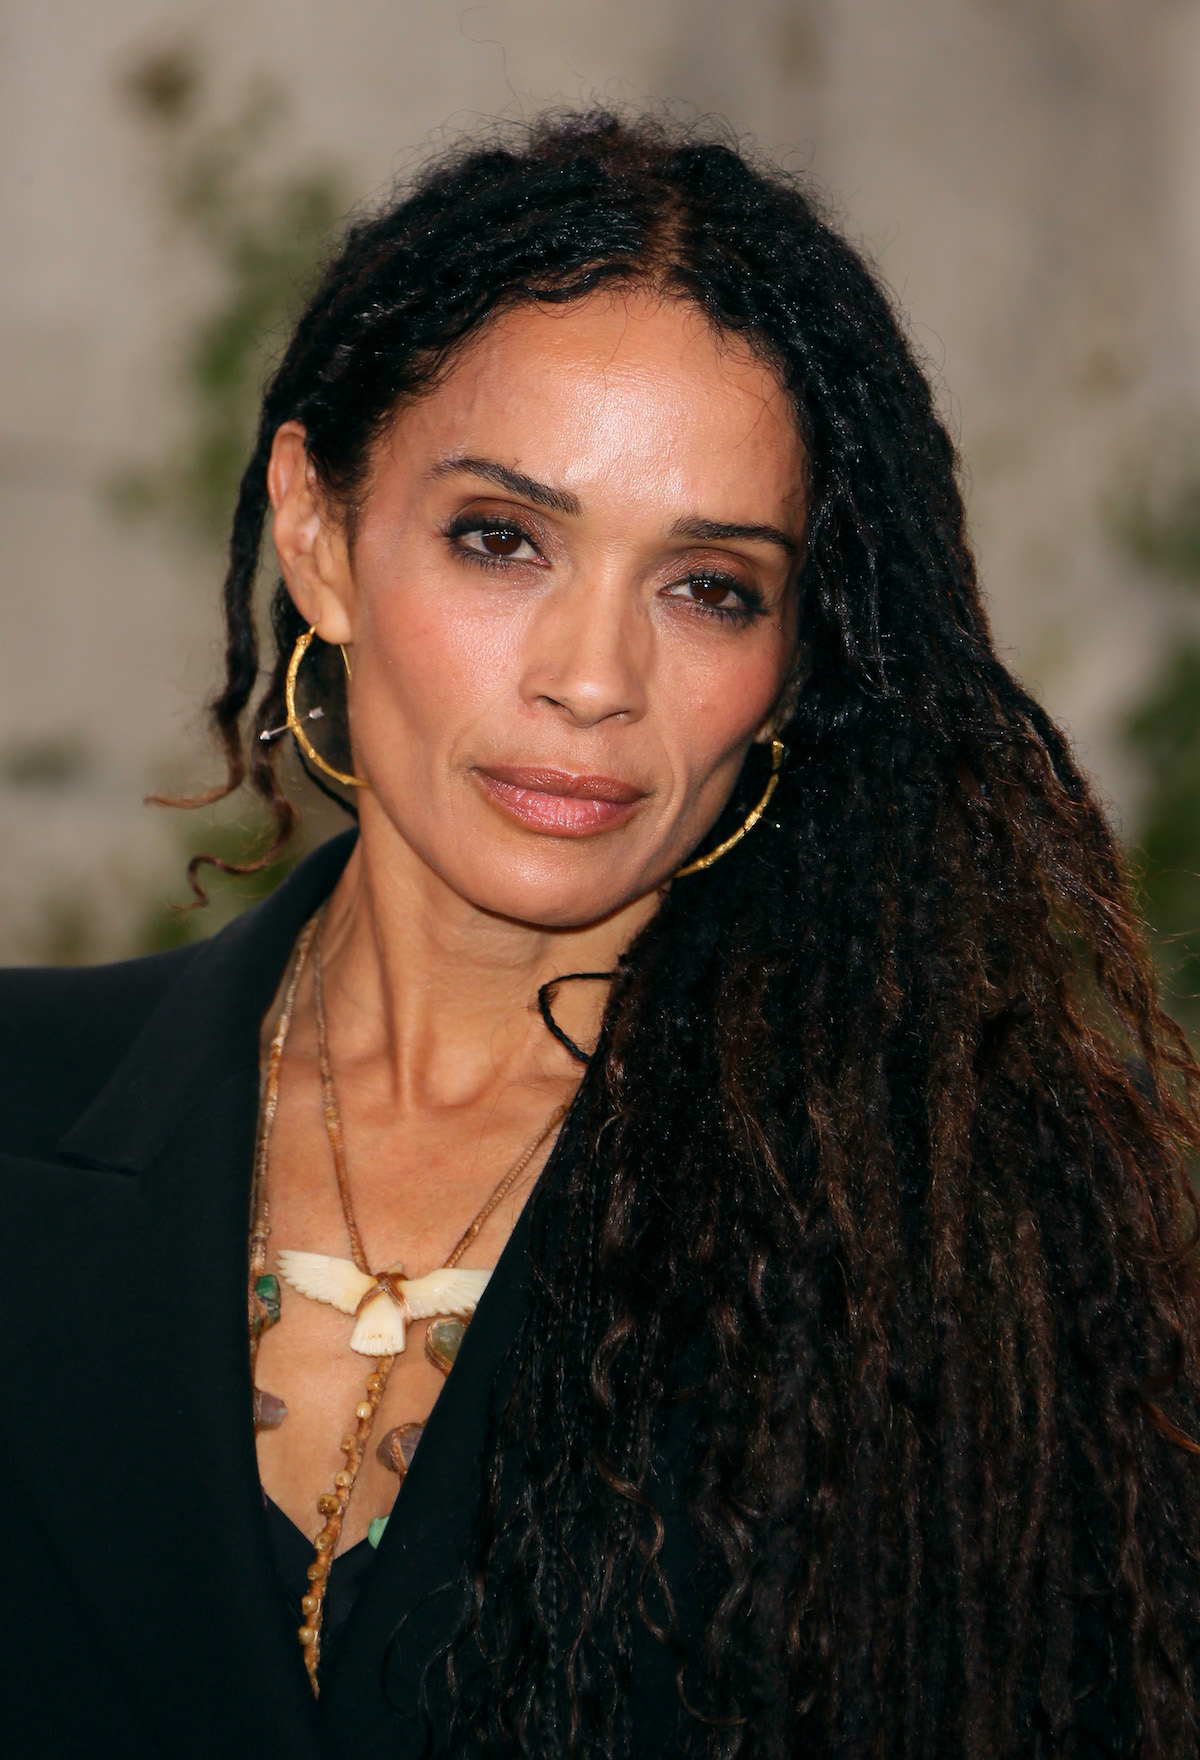 Lisa Bonet smolders for the camera in a black outfit and gold jewelry at an event.